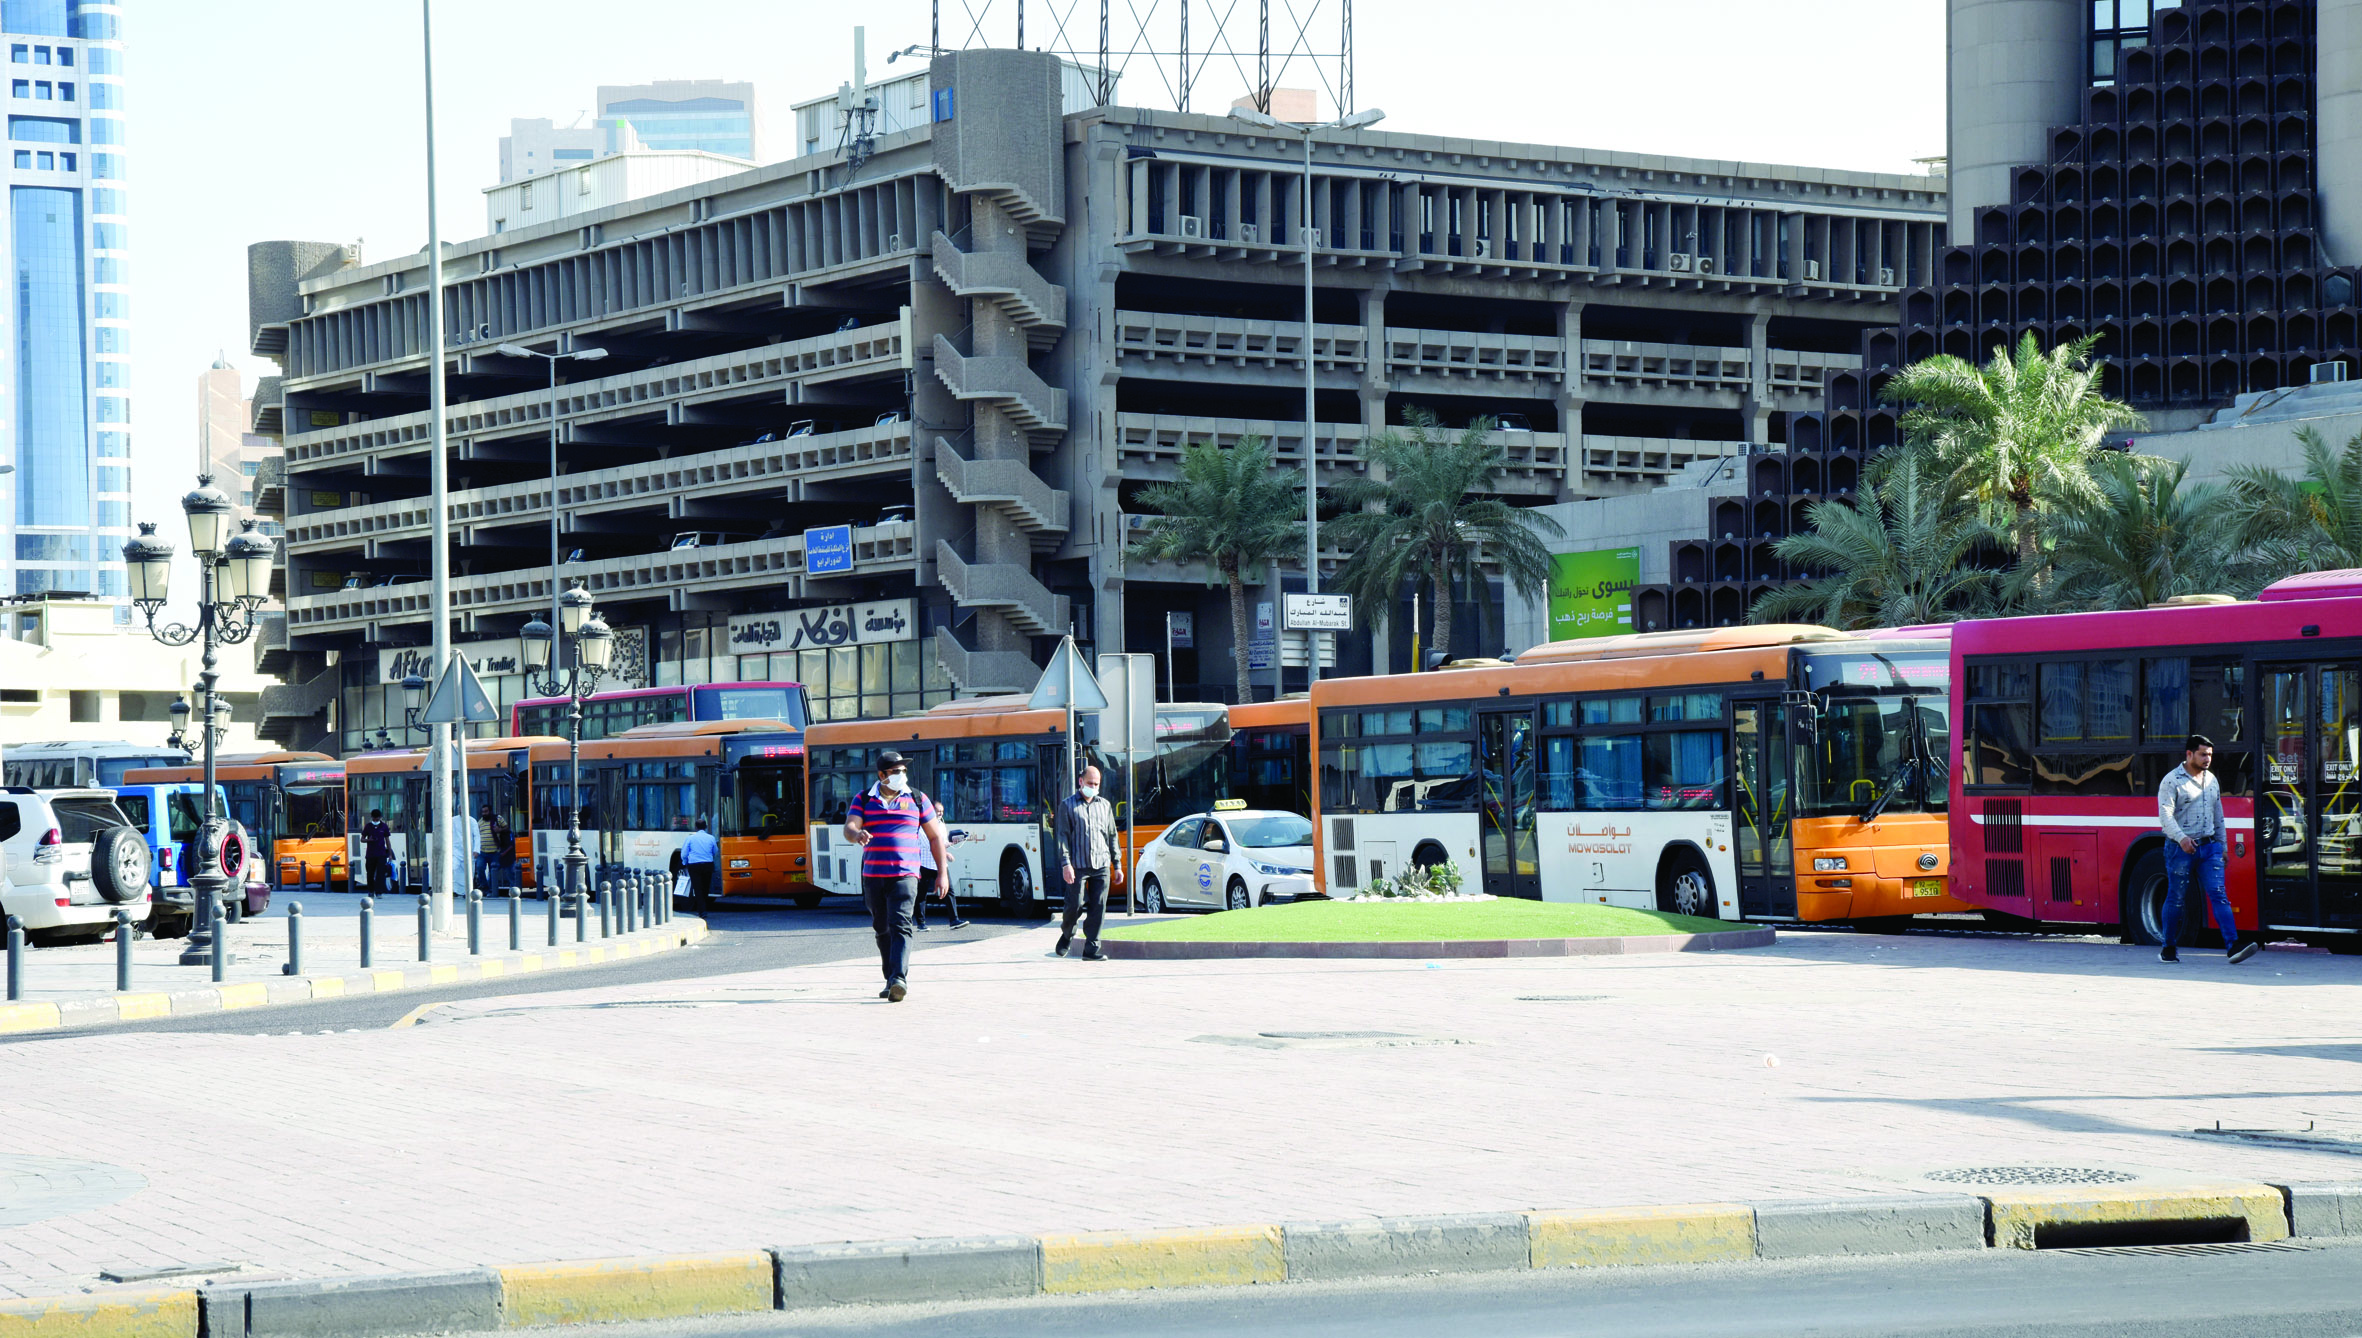 KUWAIT: This file photo shows a long line of public transportation buses at the busy Abdullah Al-Mubarak Street in Kuwait City. - Photo by Fouad Al-Shaikhn(To have your picture featured in the Kuwait Times' 'Photo of the Day' section, please send your horizontal, high resolution and unedited photos to local@kuwaittimes.com, along with the full name and Instagram account, in addition to a description showing the picture's location and date taken)